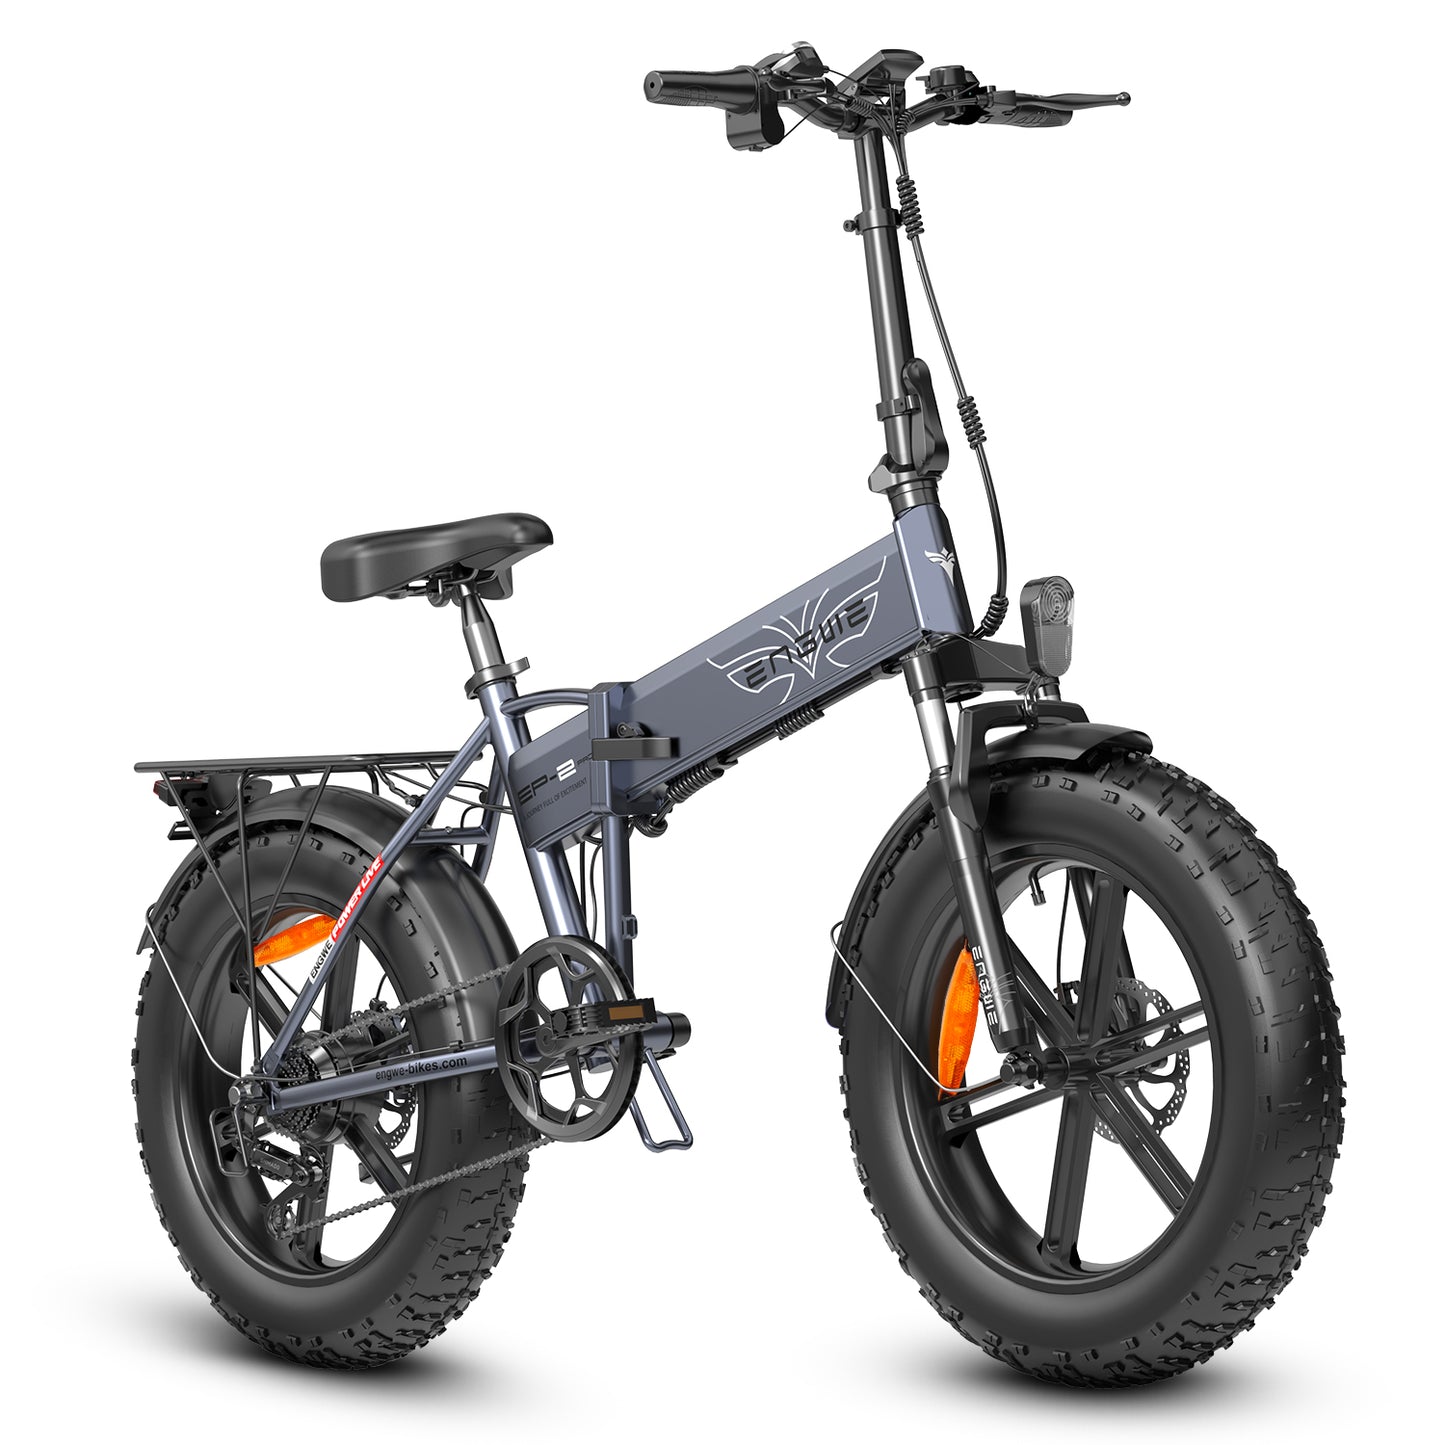 PL Warehouse Stock EP-2 PRO  750W 7 Speed 13A 20 Inch Folding Ebike